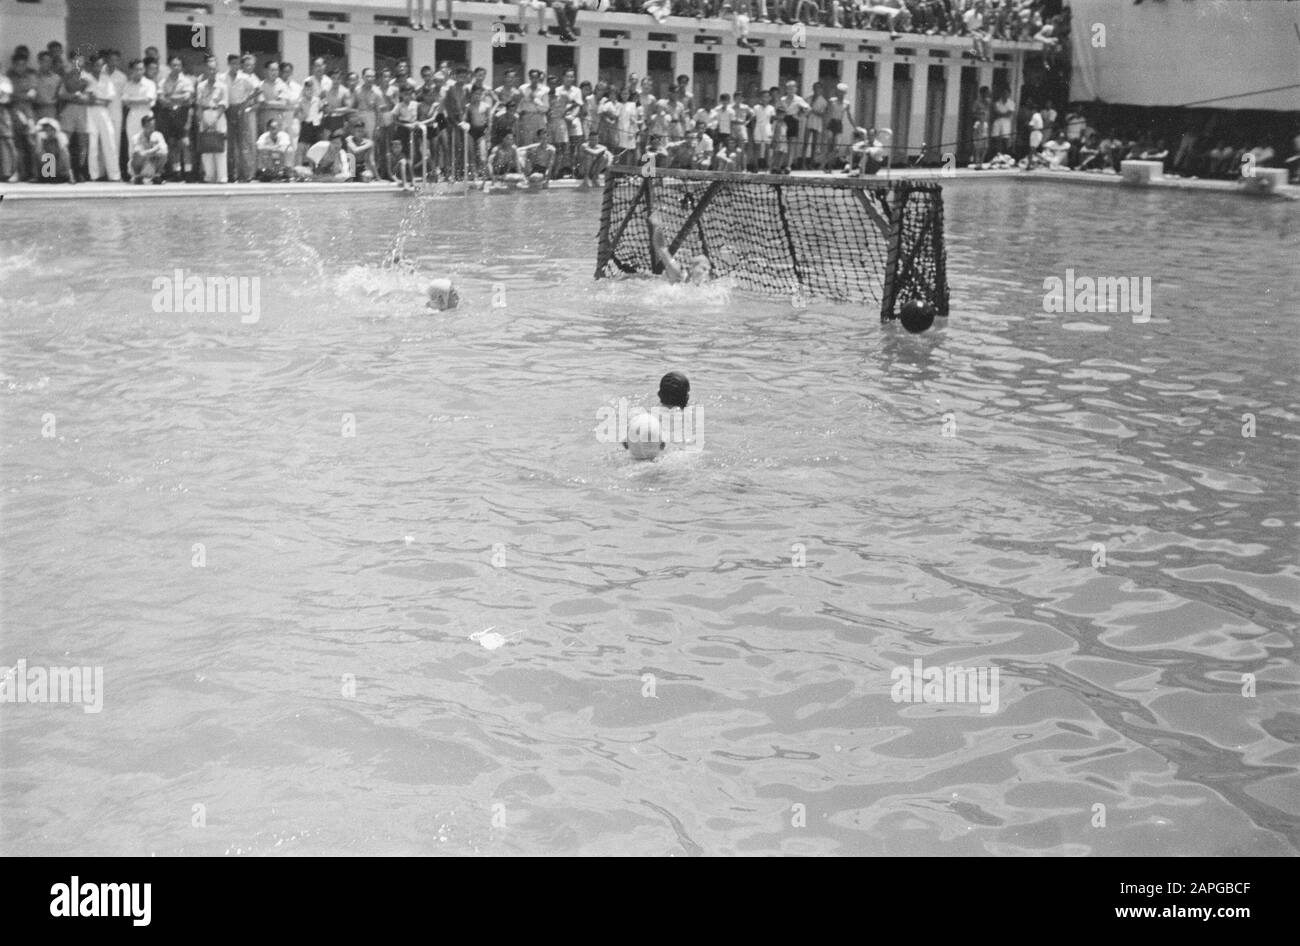 Water polo Description: Collection Photo collection Service for Army Contacts Indonesia, photon number 203-4-5 Date: april 1947 Location: Indonesia, Dutch East Indies Stock Photo